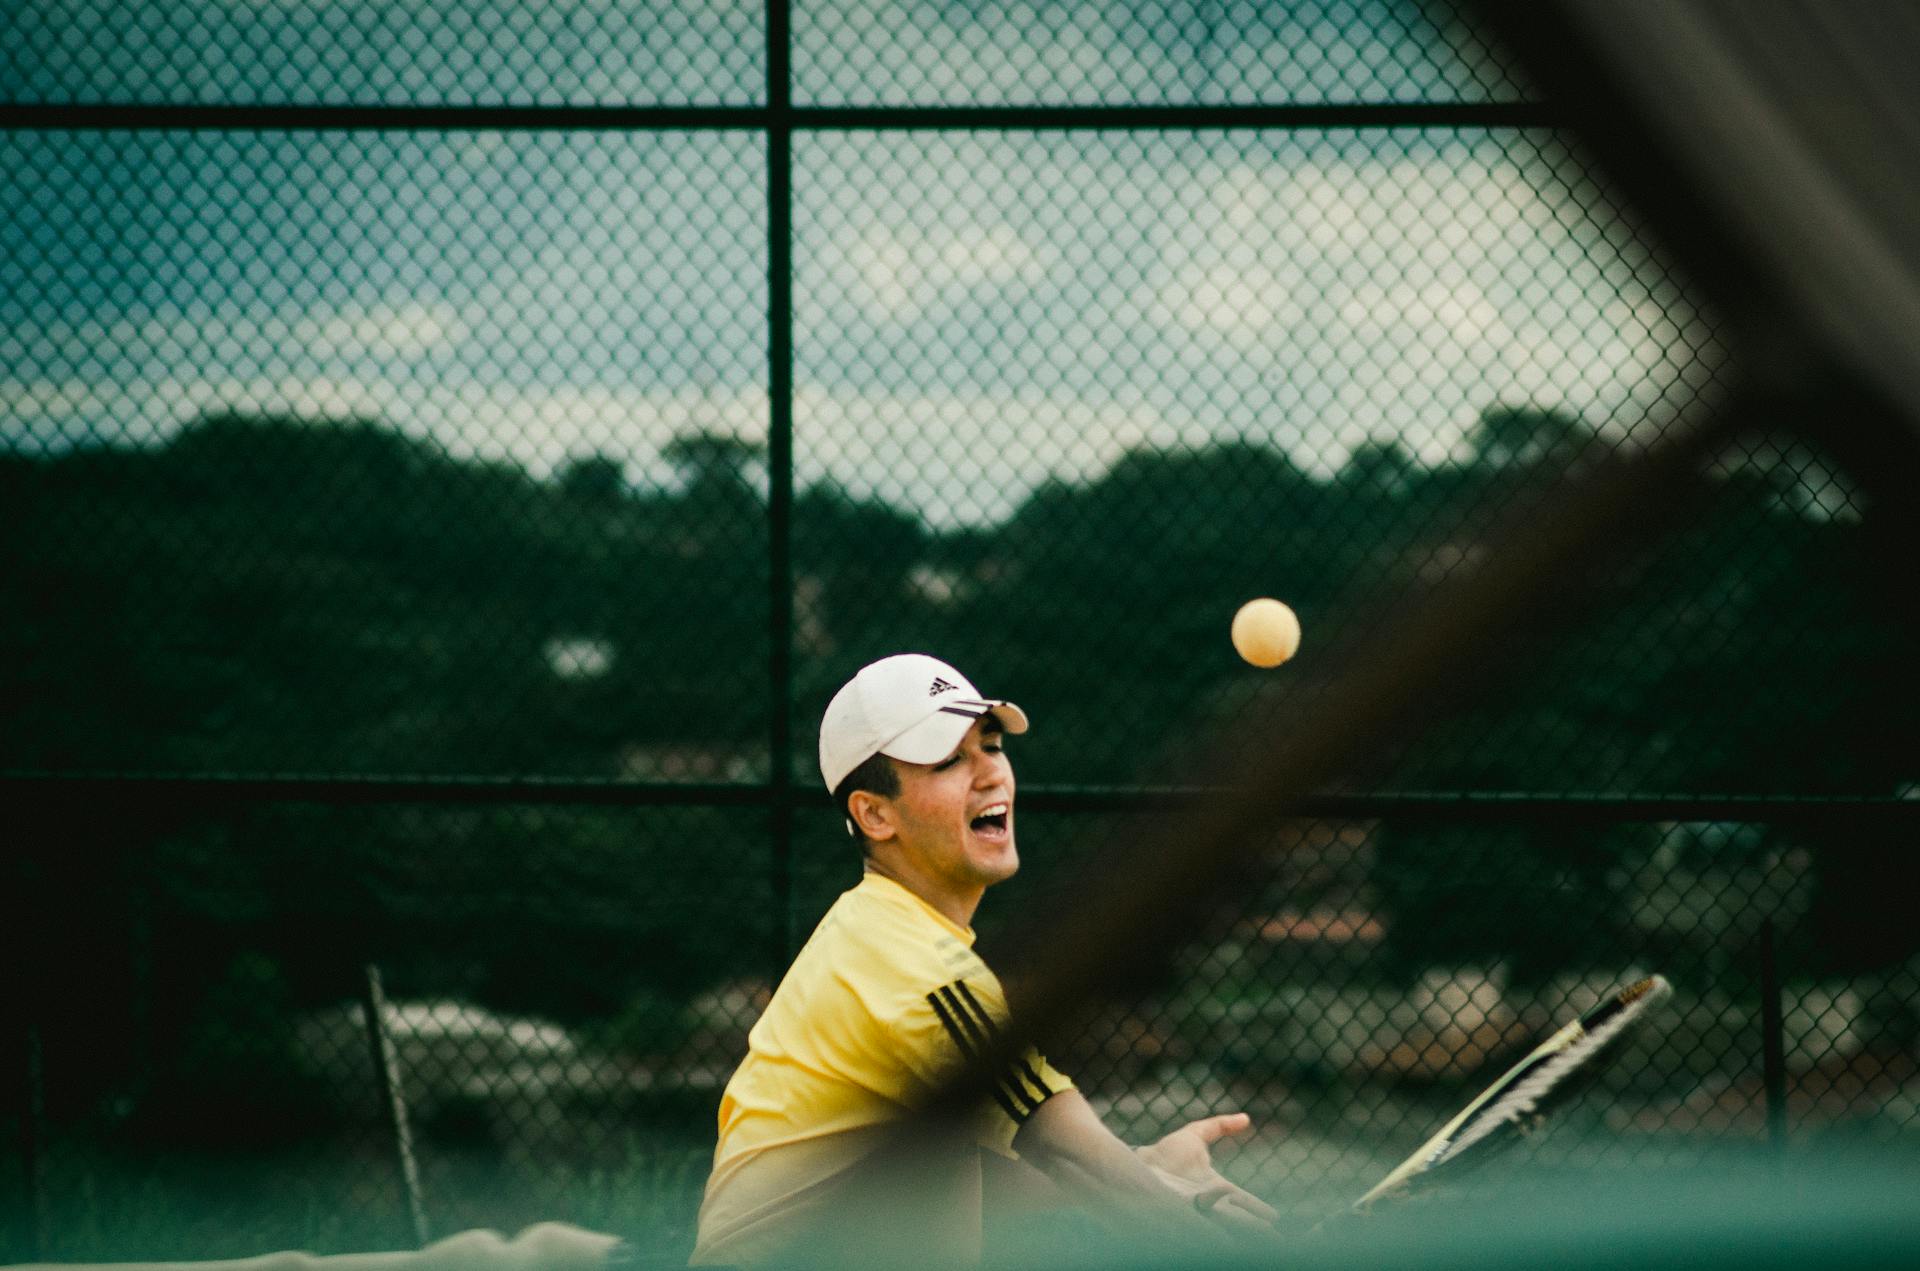 Learn tennis rules for beginners